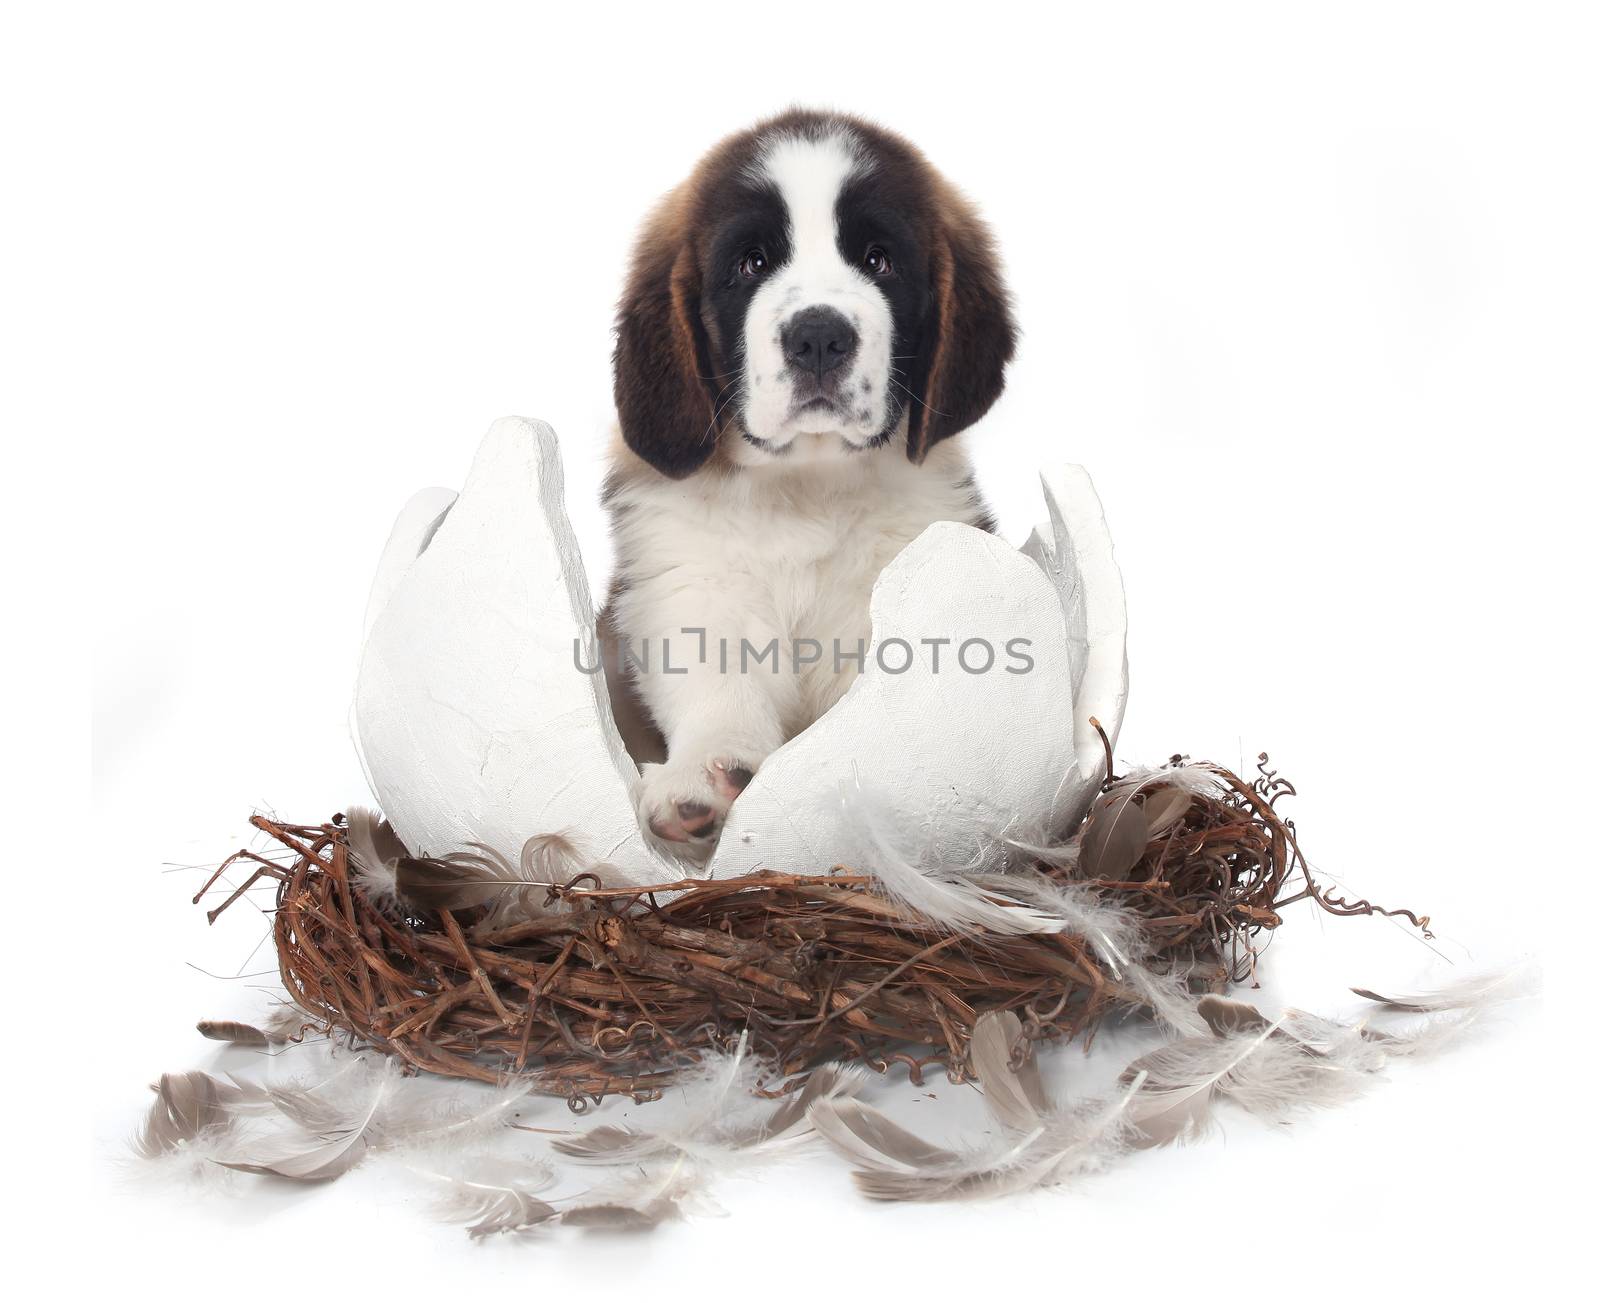 Young Saint Bernard Puppy Sitting in a Cracked Egg With Feathers